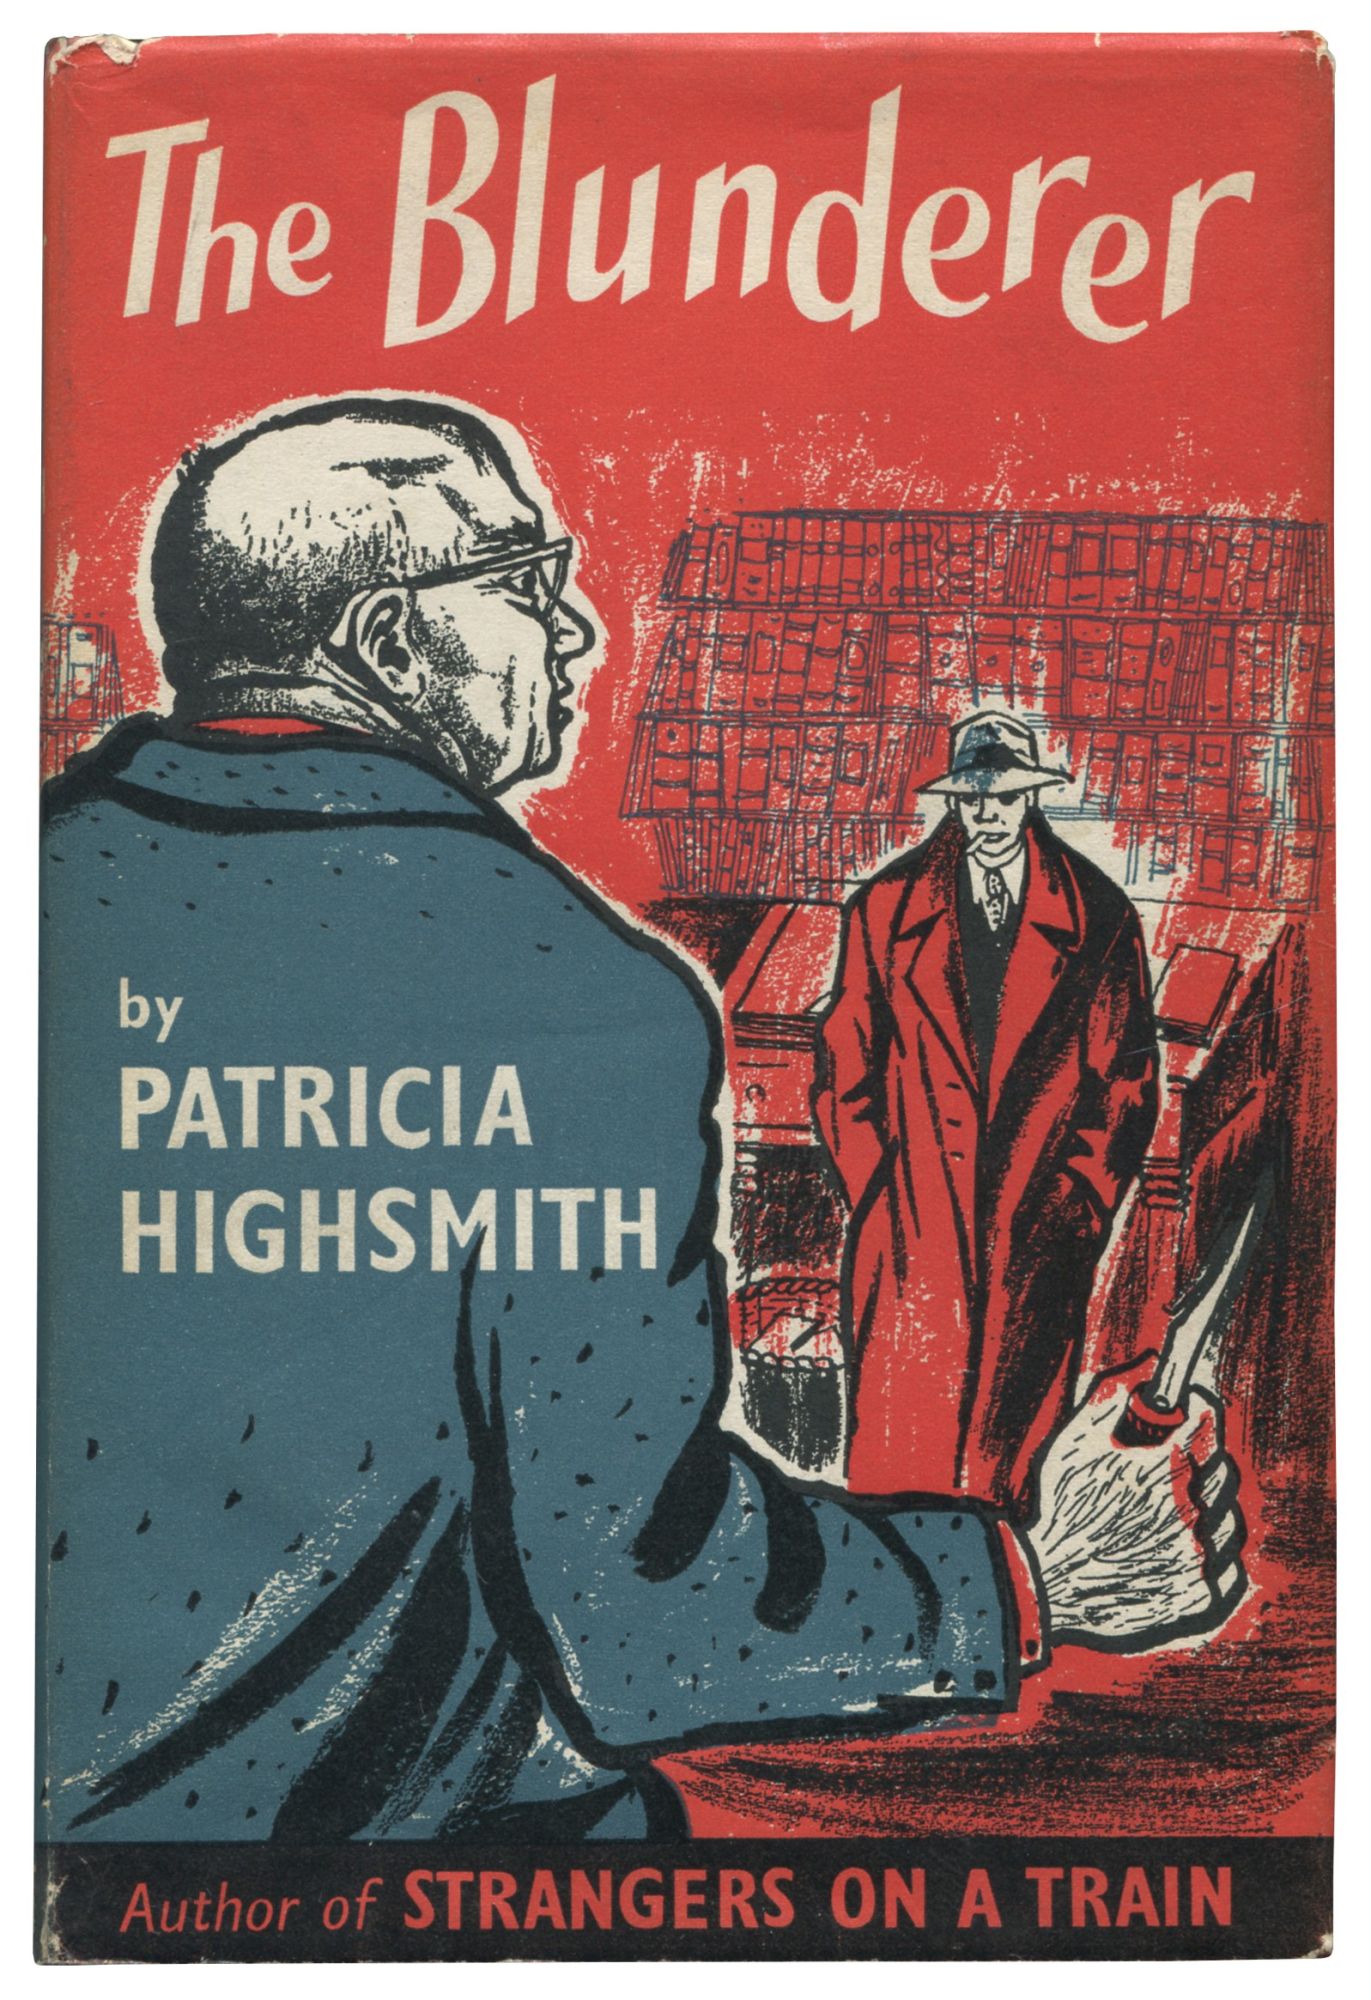 Strangers on a Train by Patricia Highsmith